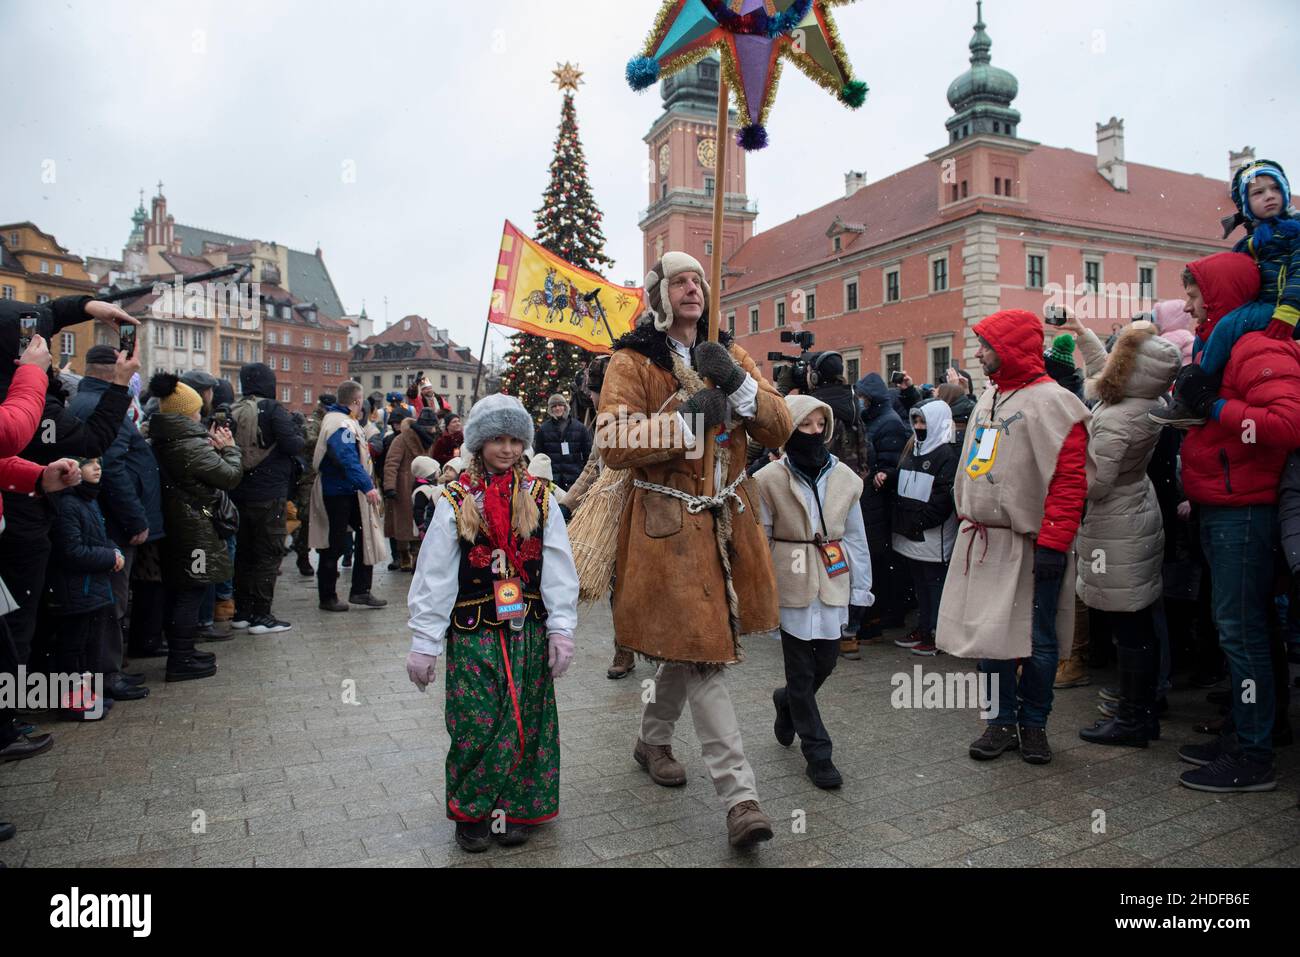 Warsaw, Warsaw, Poland:January 6, 2022, A man surrounded by children dressed in traditional clothes carries a star during the Epiphany celebration on January 6, 2022 in Warsaw, Poland. Several hundreds of people gathered in the old town to celebrate Epiphany, also known as Three Kings Day in Poland, despite the rising number of Sars-CoV2 (Coronavirus) infections. (Credit Image: © Aleksander Kalka/ZUMA Press Wire) Stock Photo